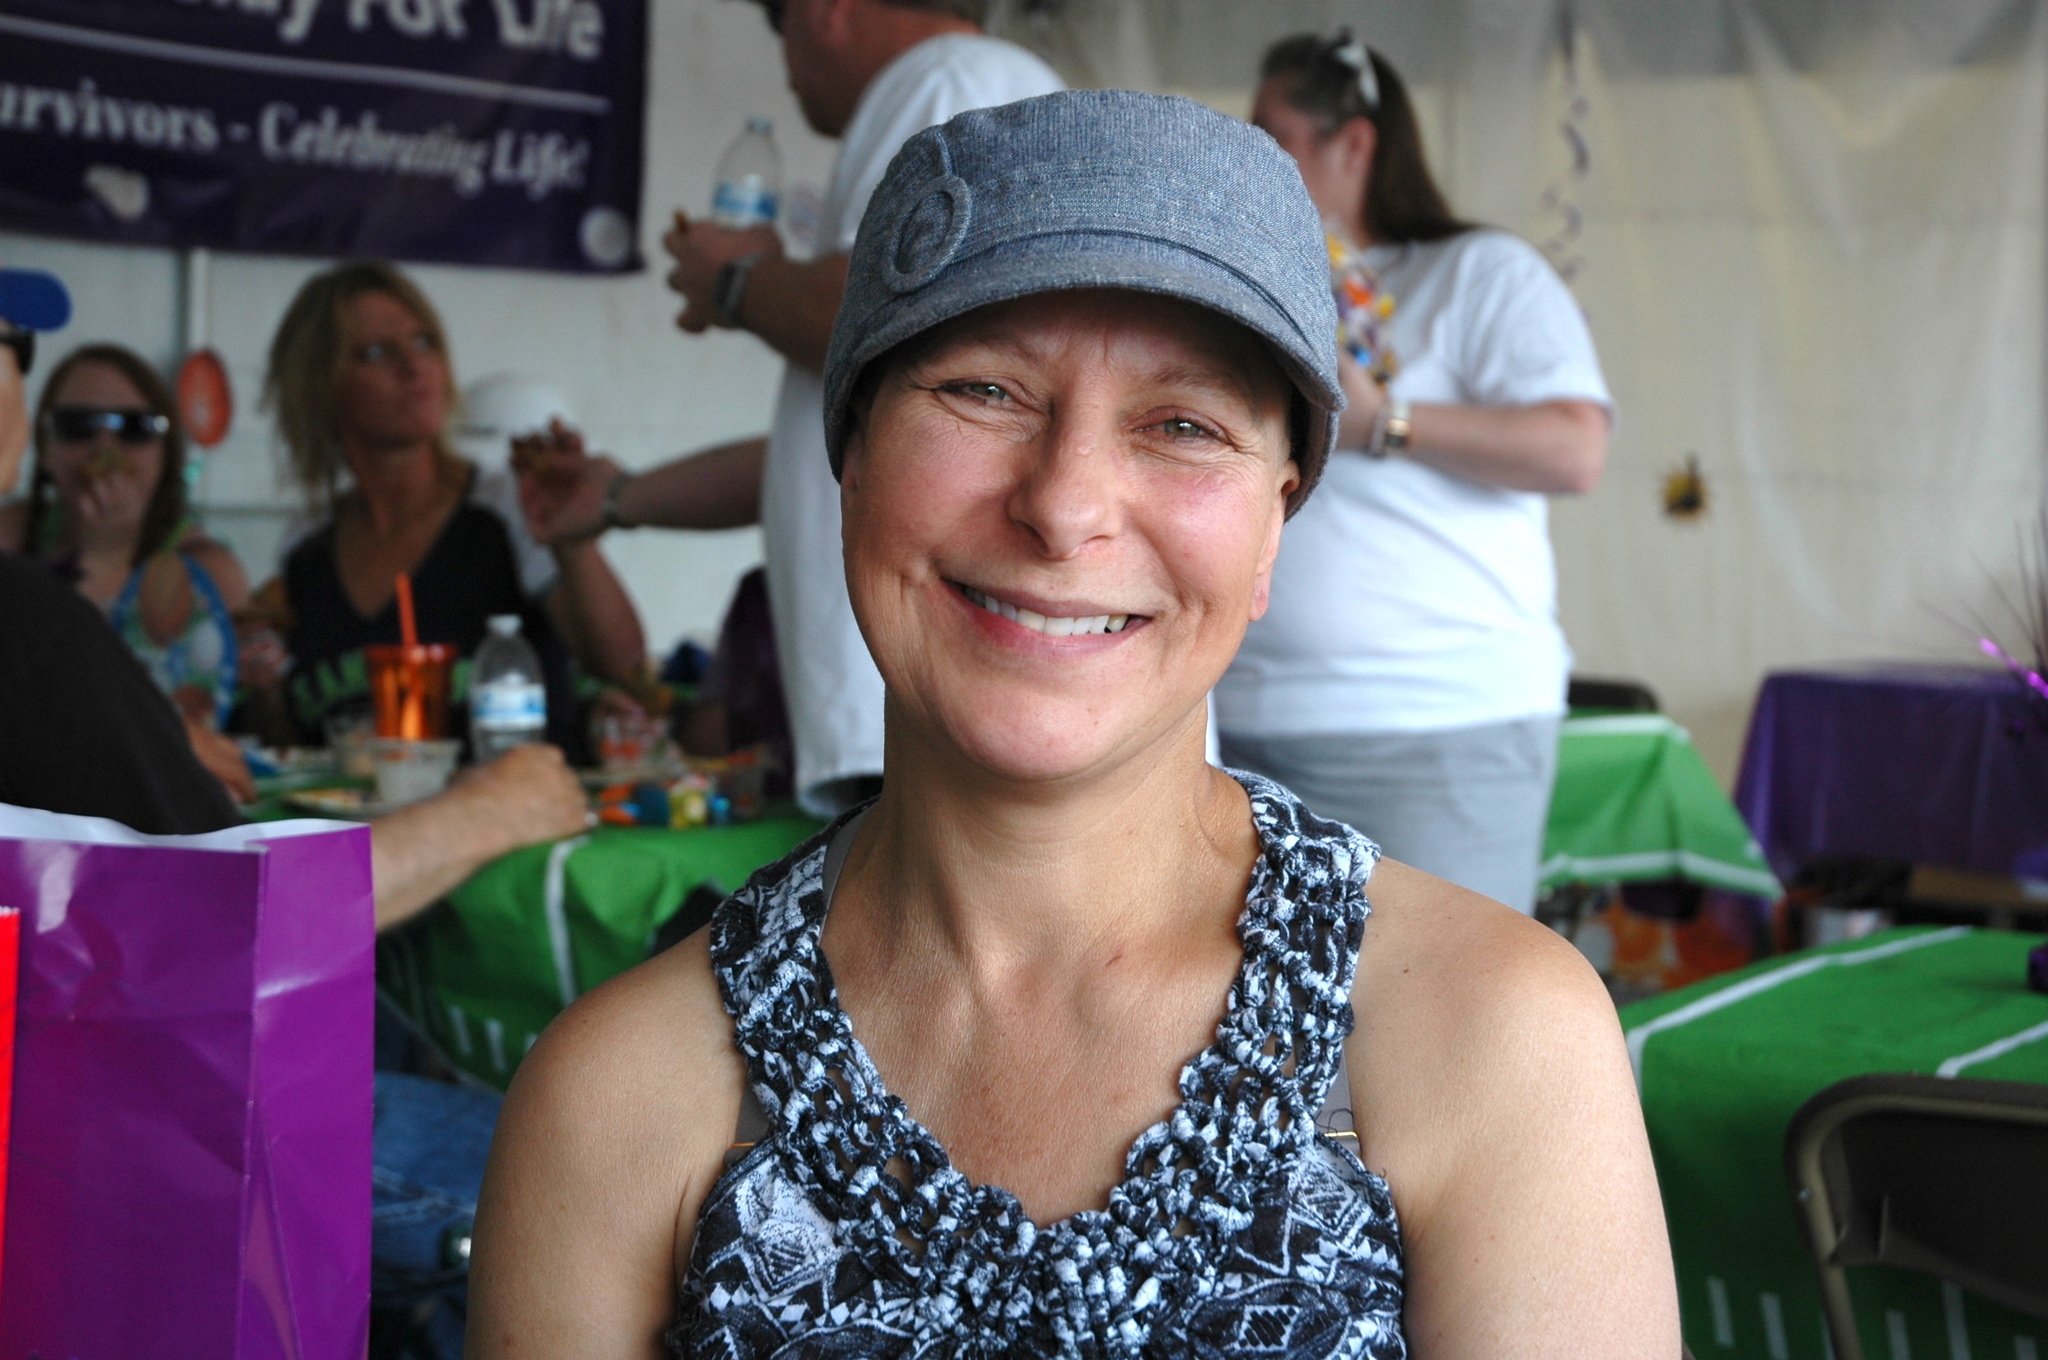 Marysville cancer survivor shares her story at Relay For Life